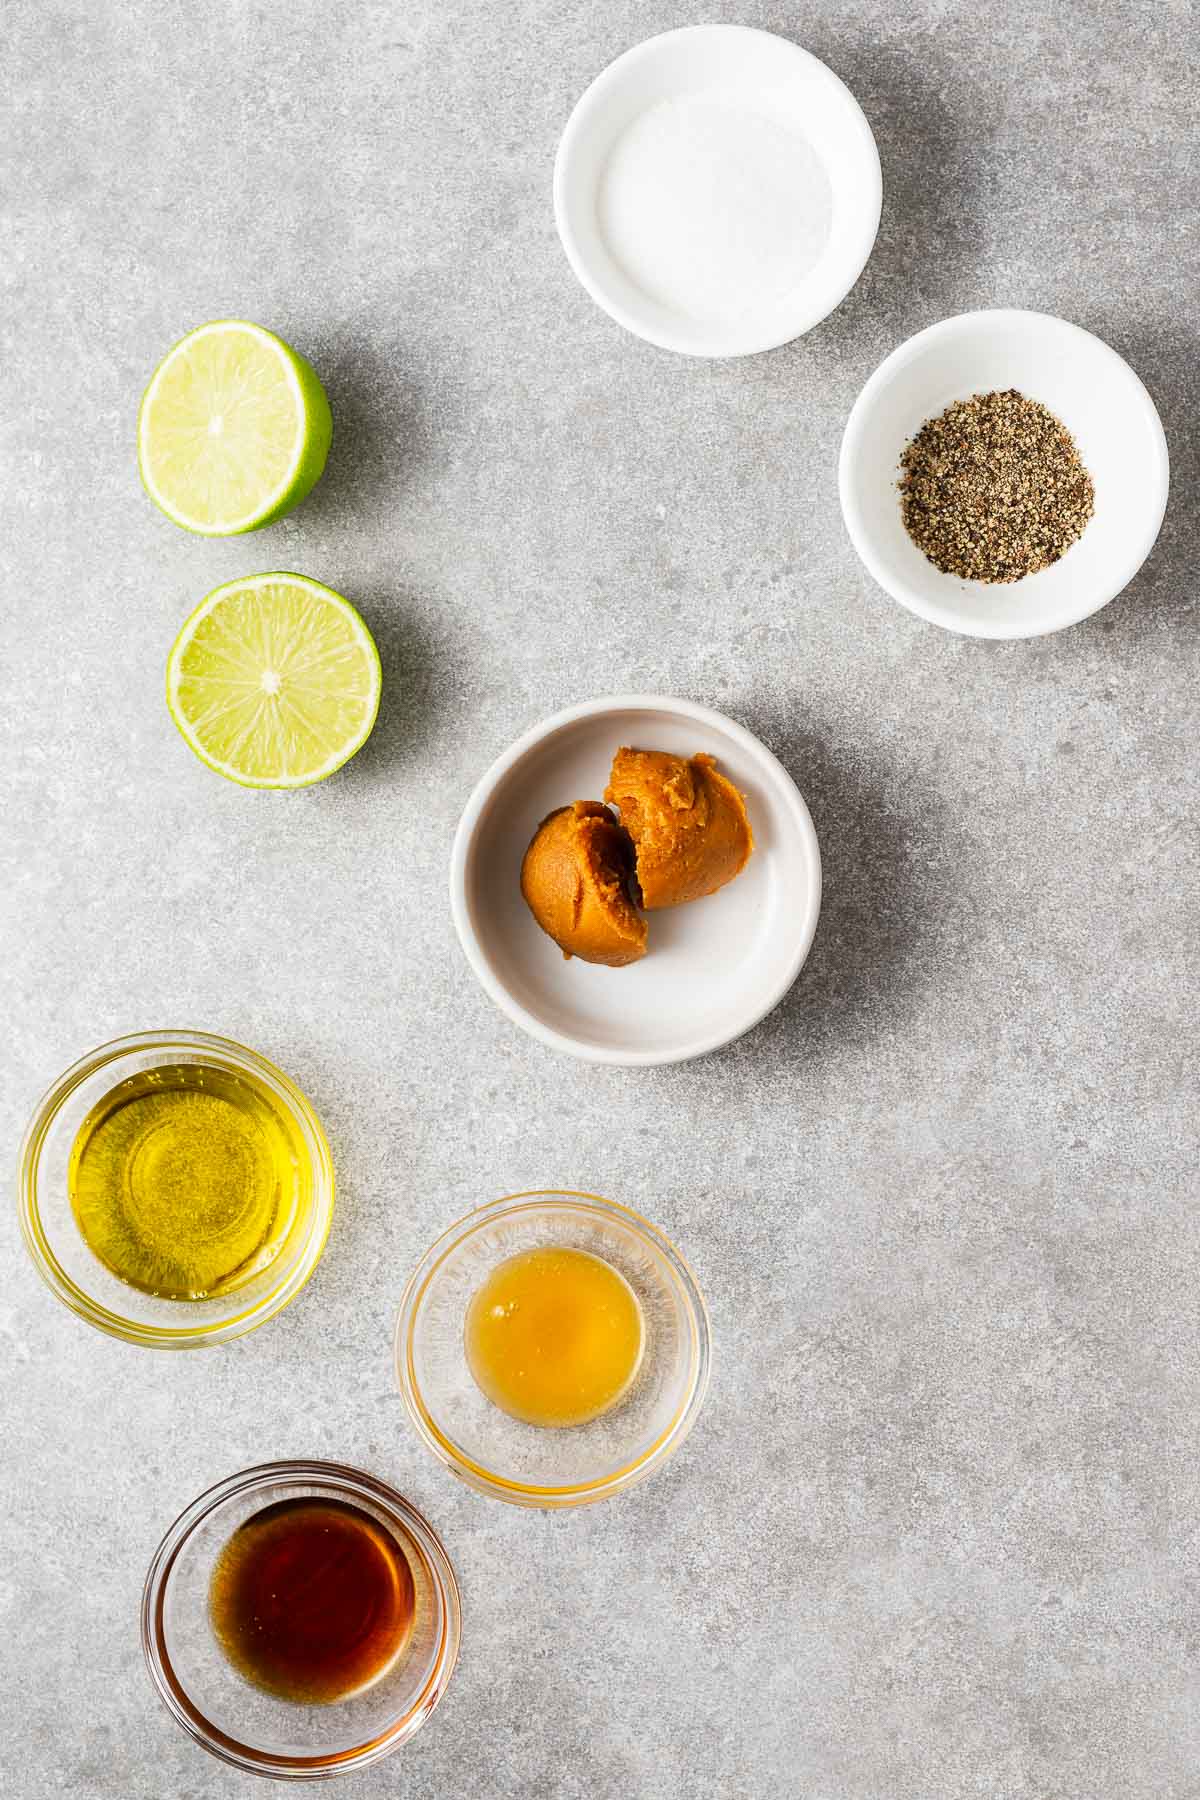 The ingredients for miso lime dressing include olive oil, sesame oil, miso paste, lime juice, honey and salt and pepper.